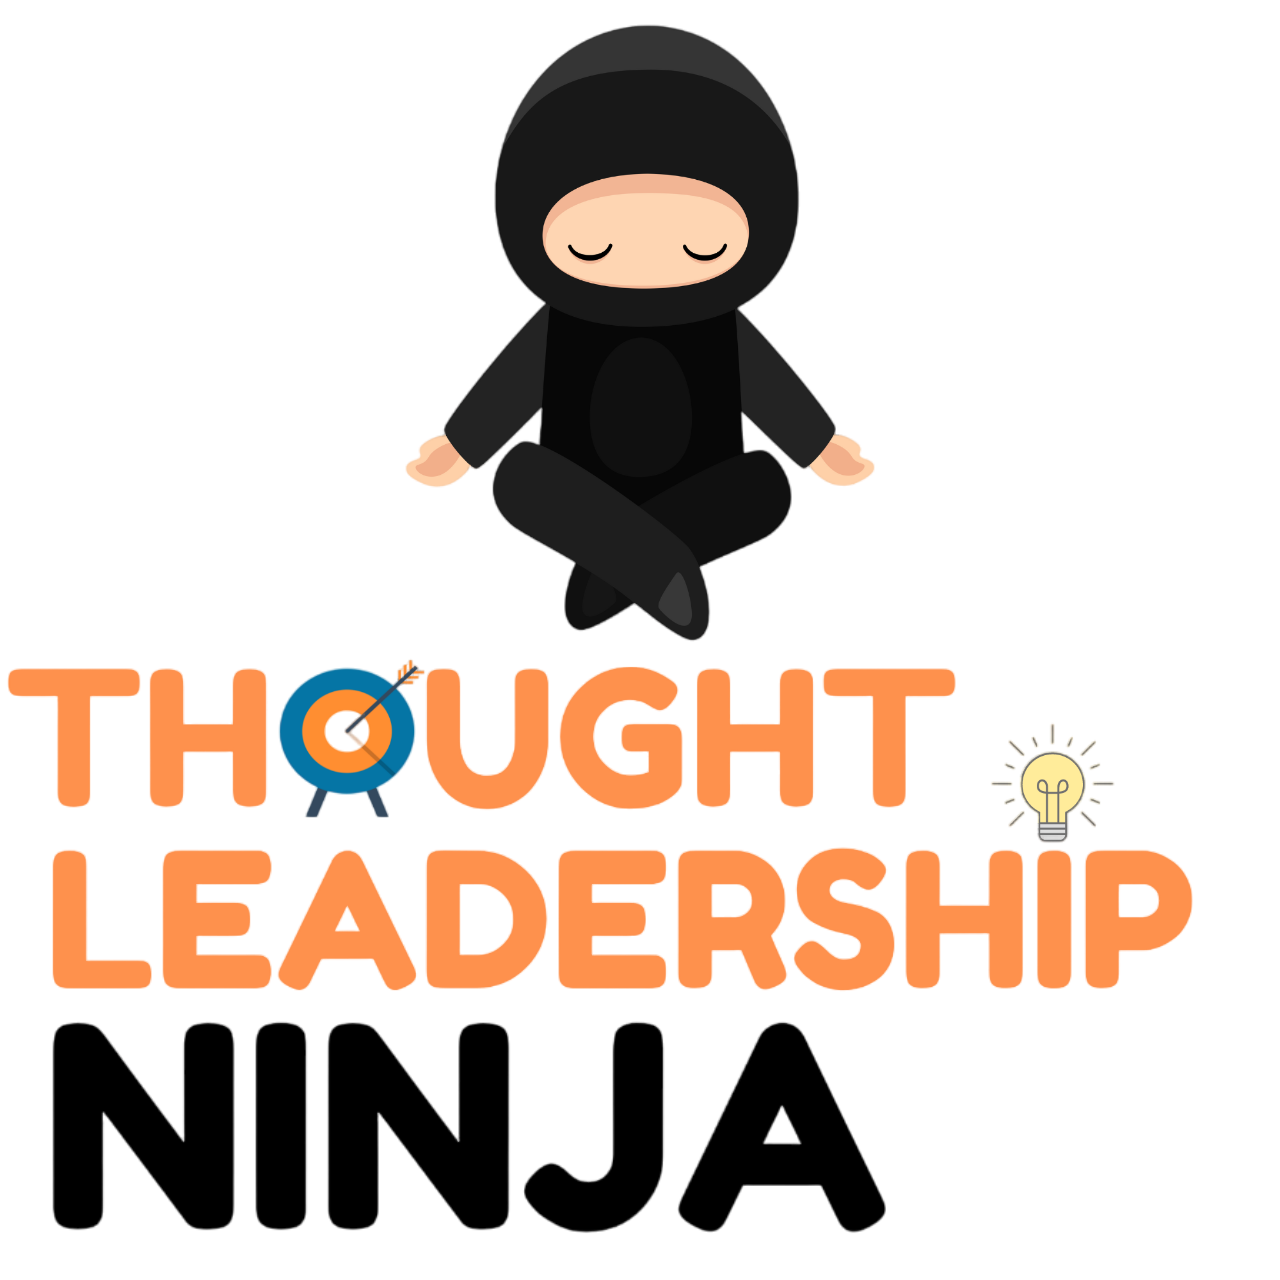 Thought Leadership Ninja by Expert Content Pros